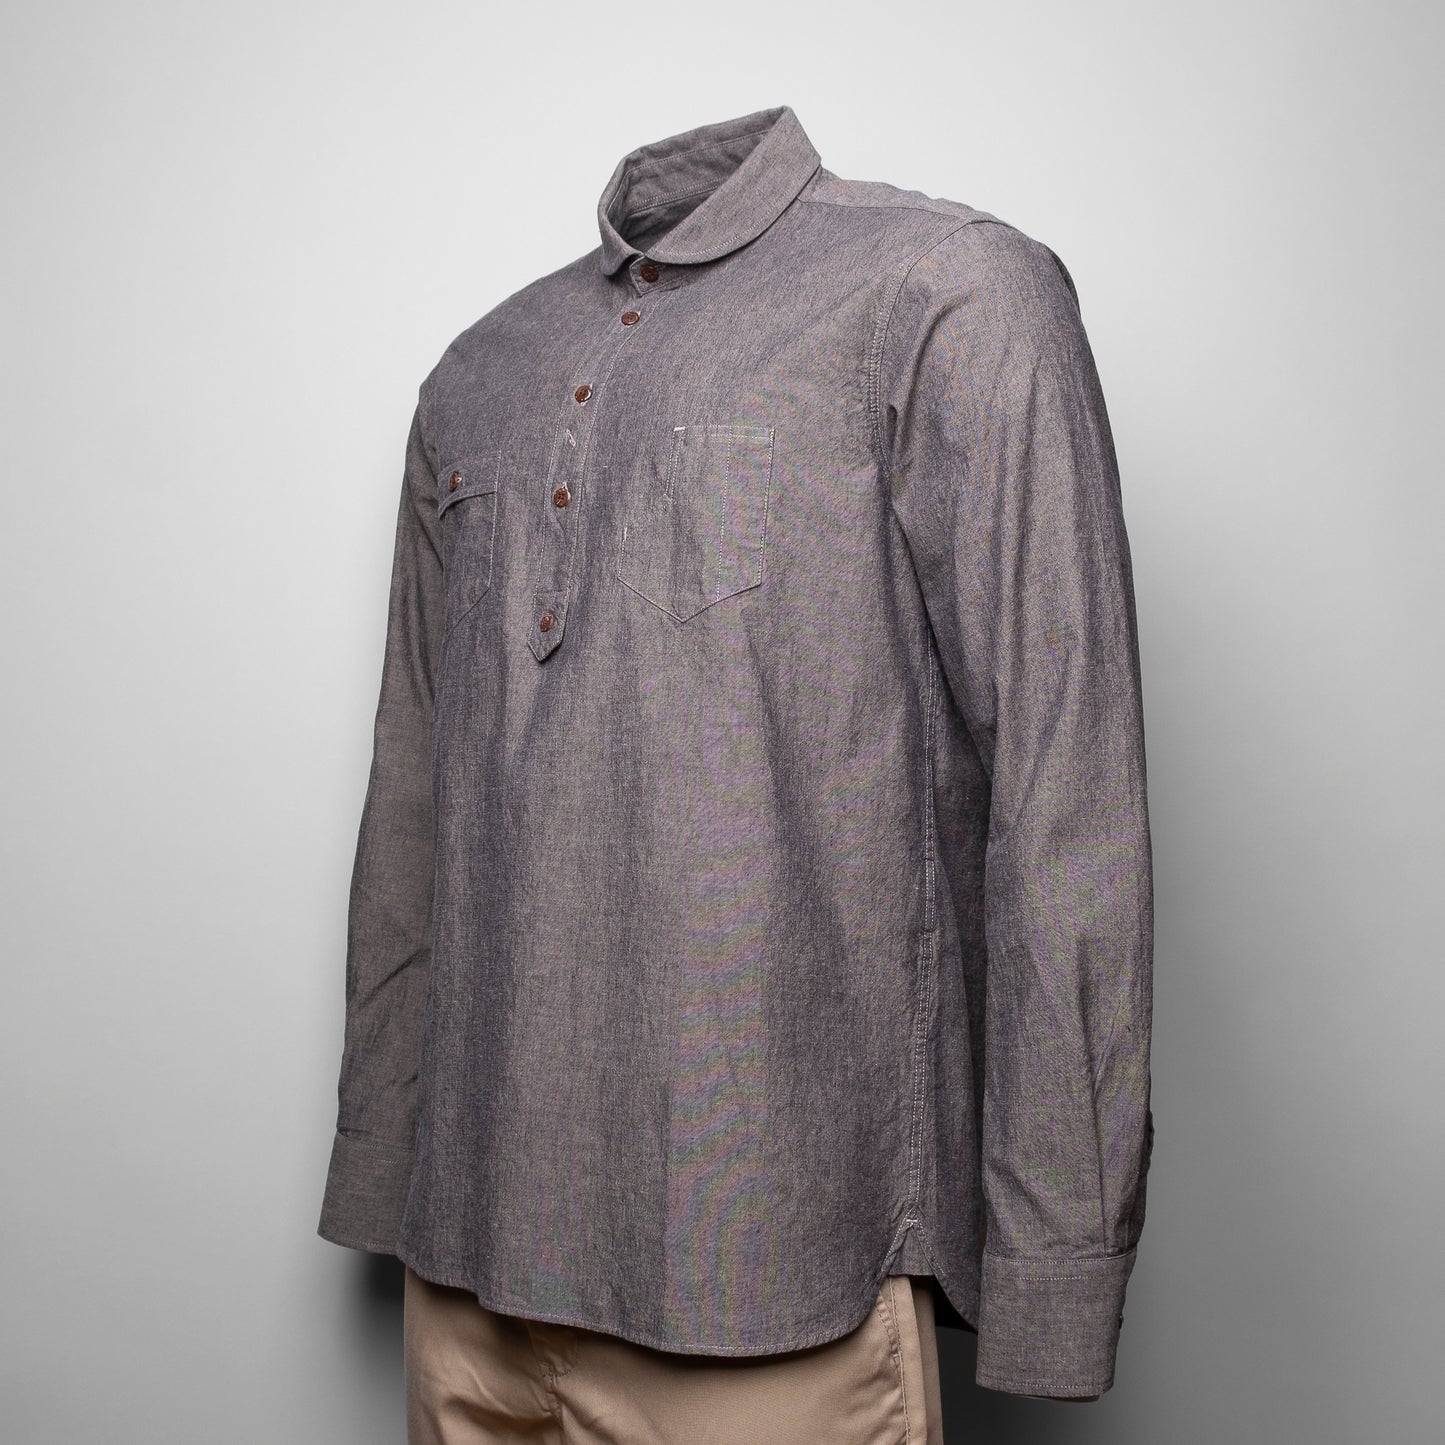 PIKE BROTHERS - 1908 MINER SHIRT Charcoal Grey